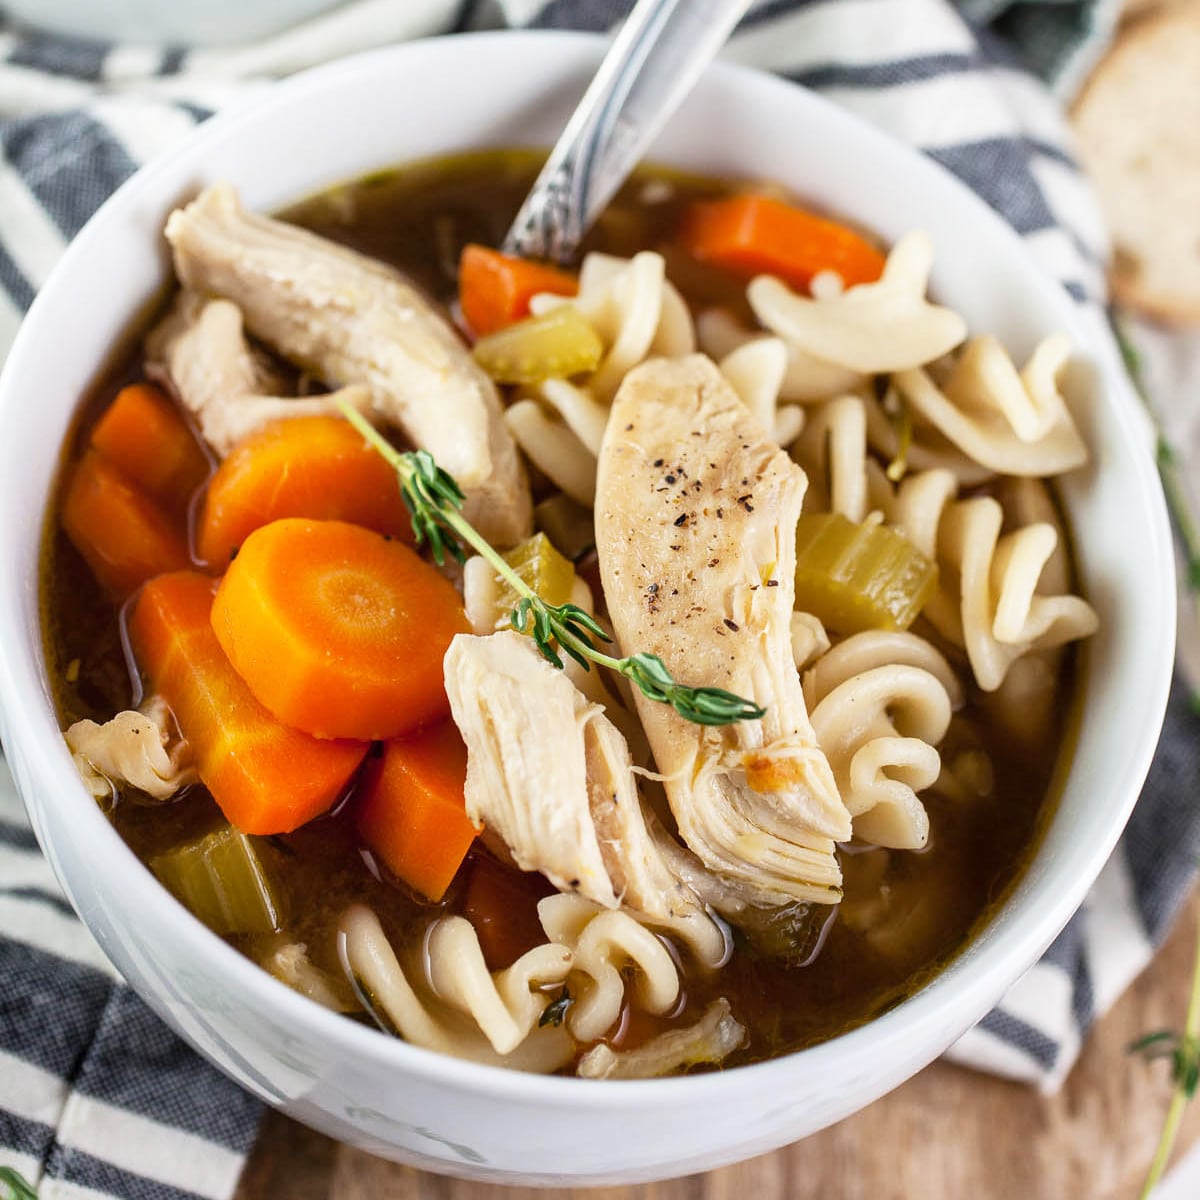 https://www.therusticfoodie.com/wp-content/uploads/2021/10/Gluten-Free-Chicken-Noodle-Soup-featured.jpg